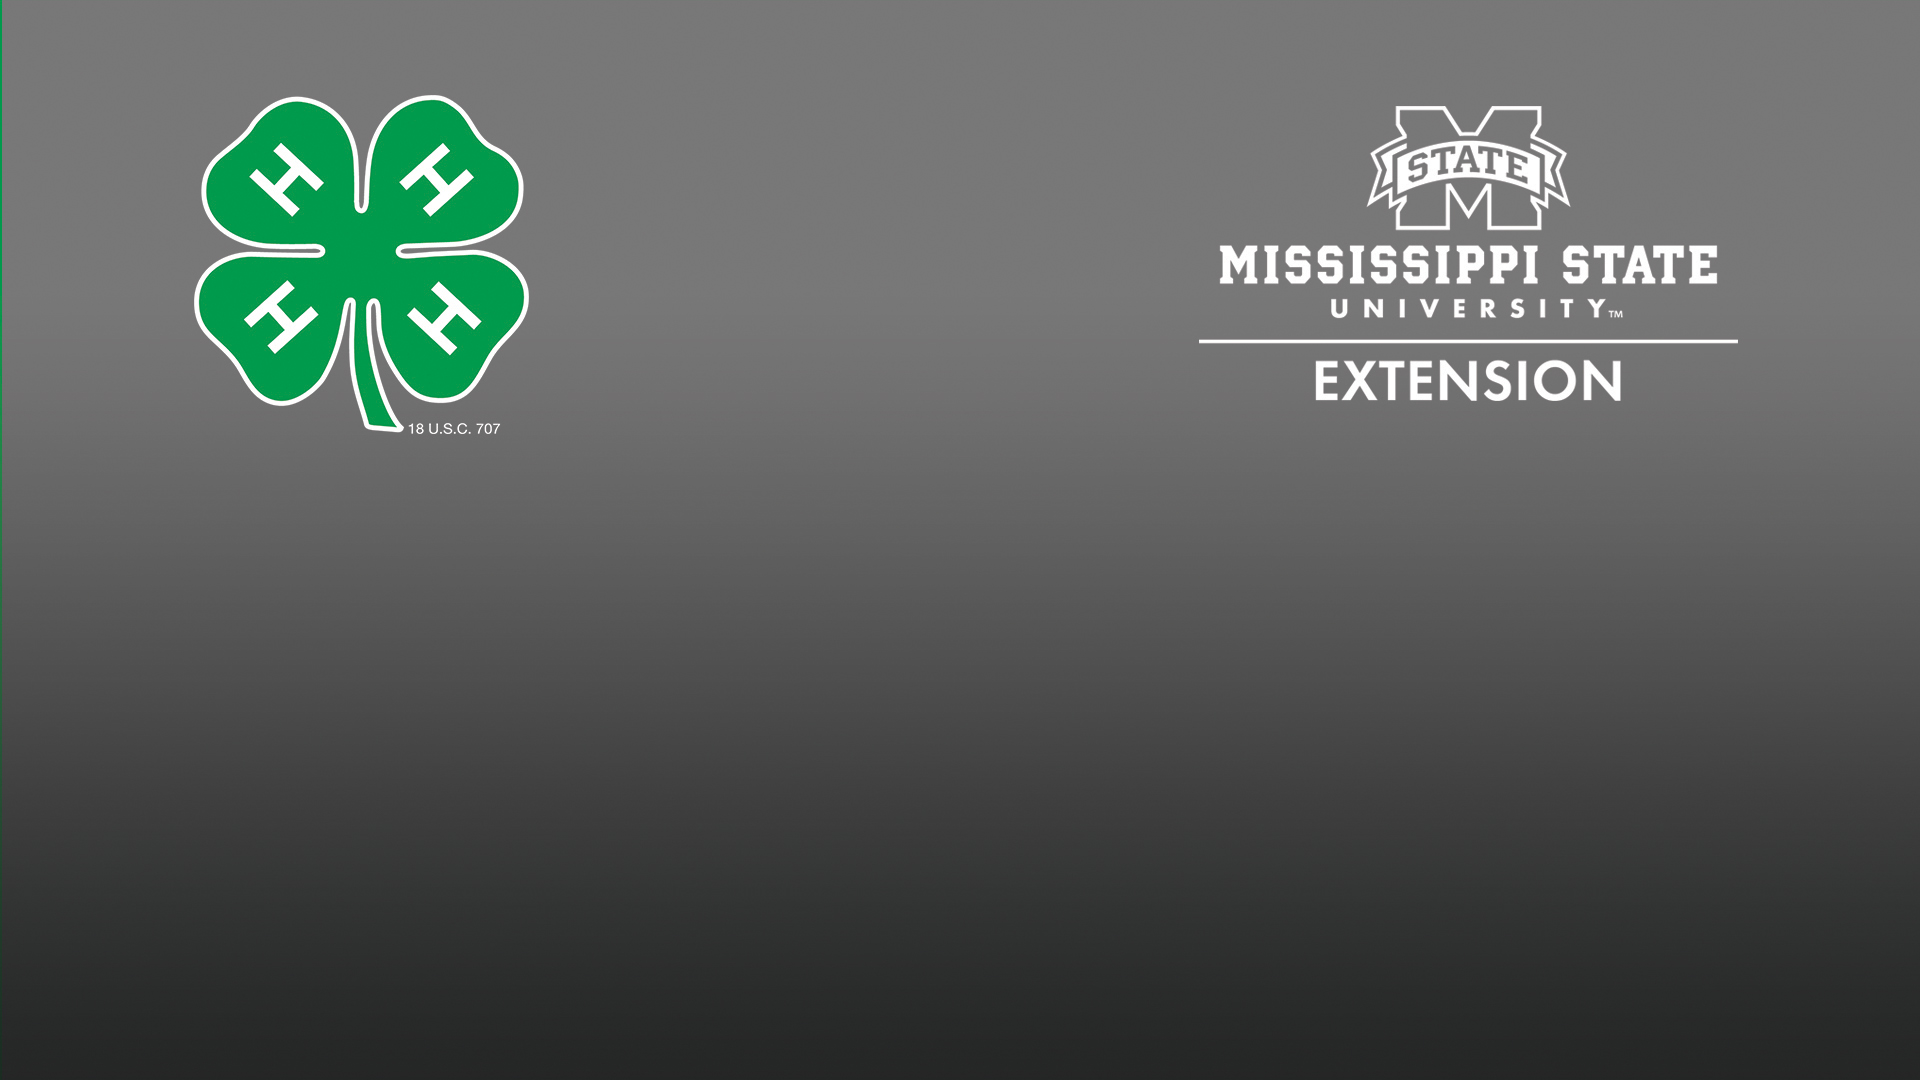 Gray gradient background with 4-H and Extension logos.